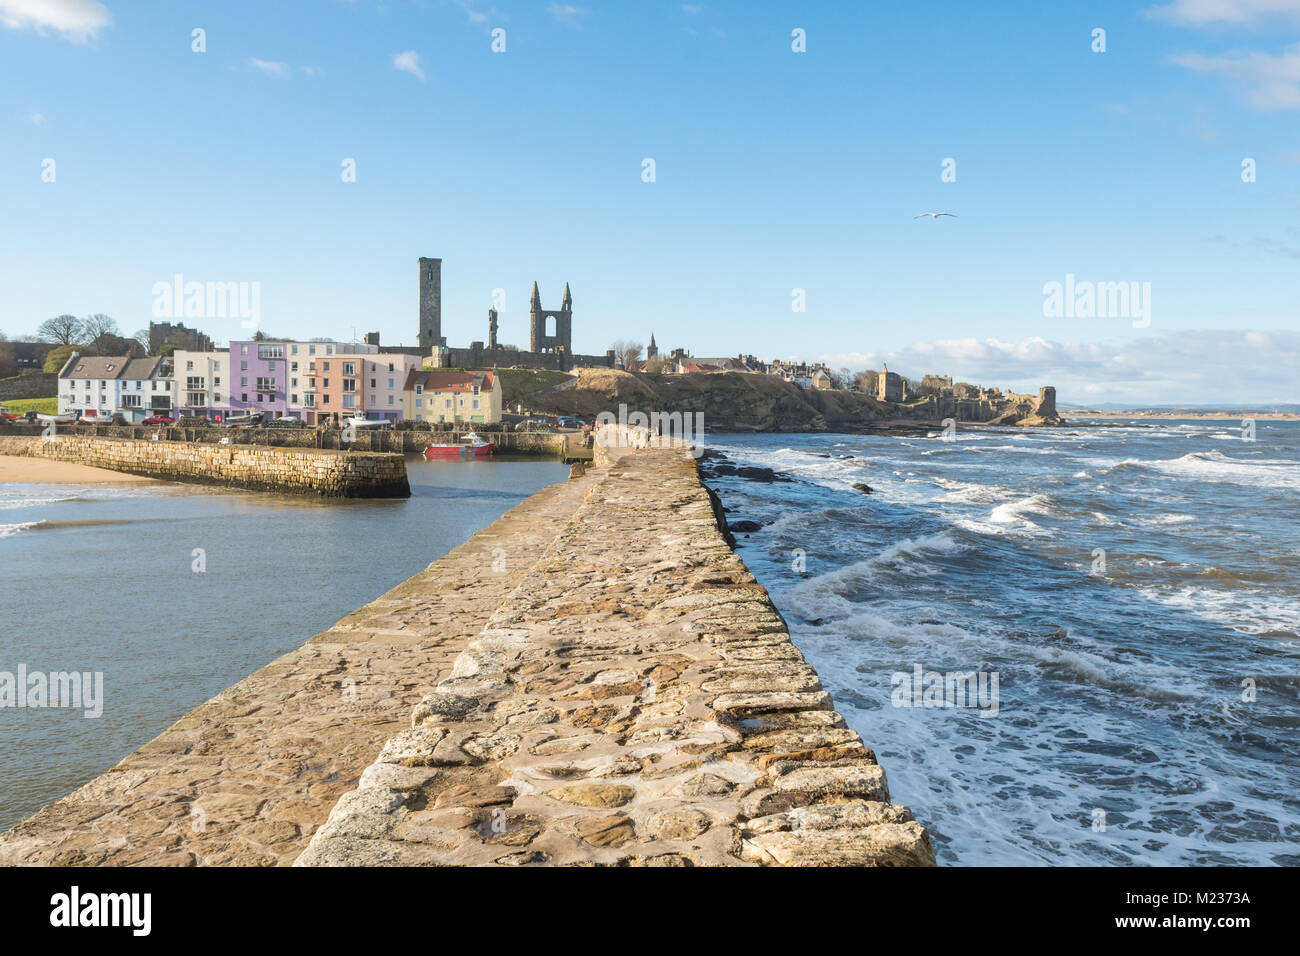 St Andrews vew as seen from the pier, St Andrews, Fife, Scotland, UK Stock Photo